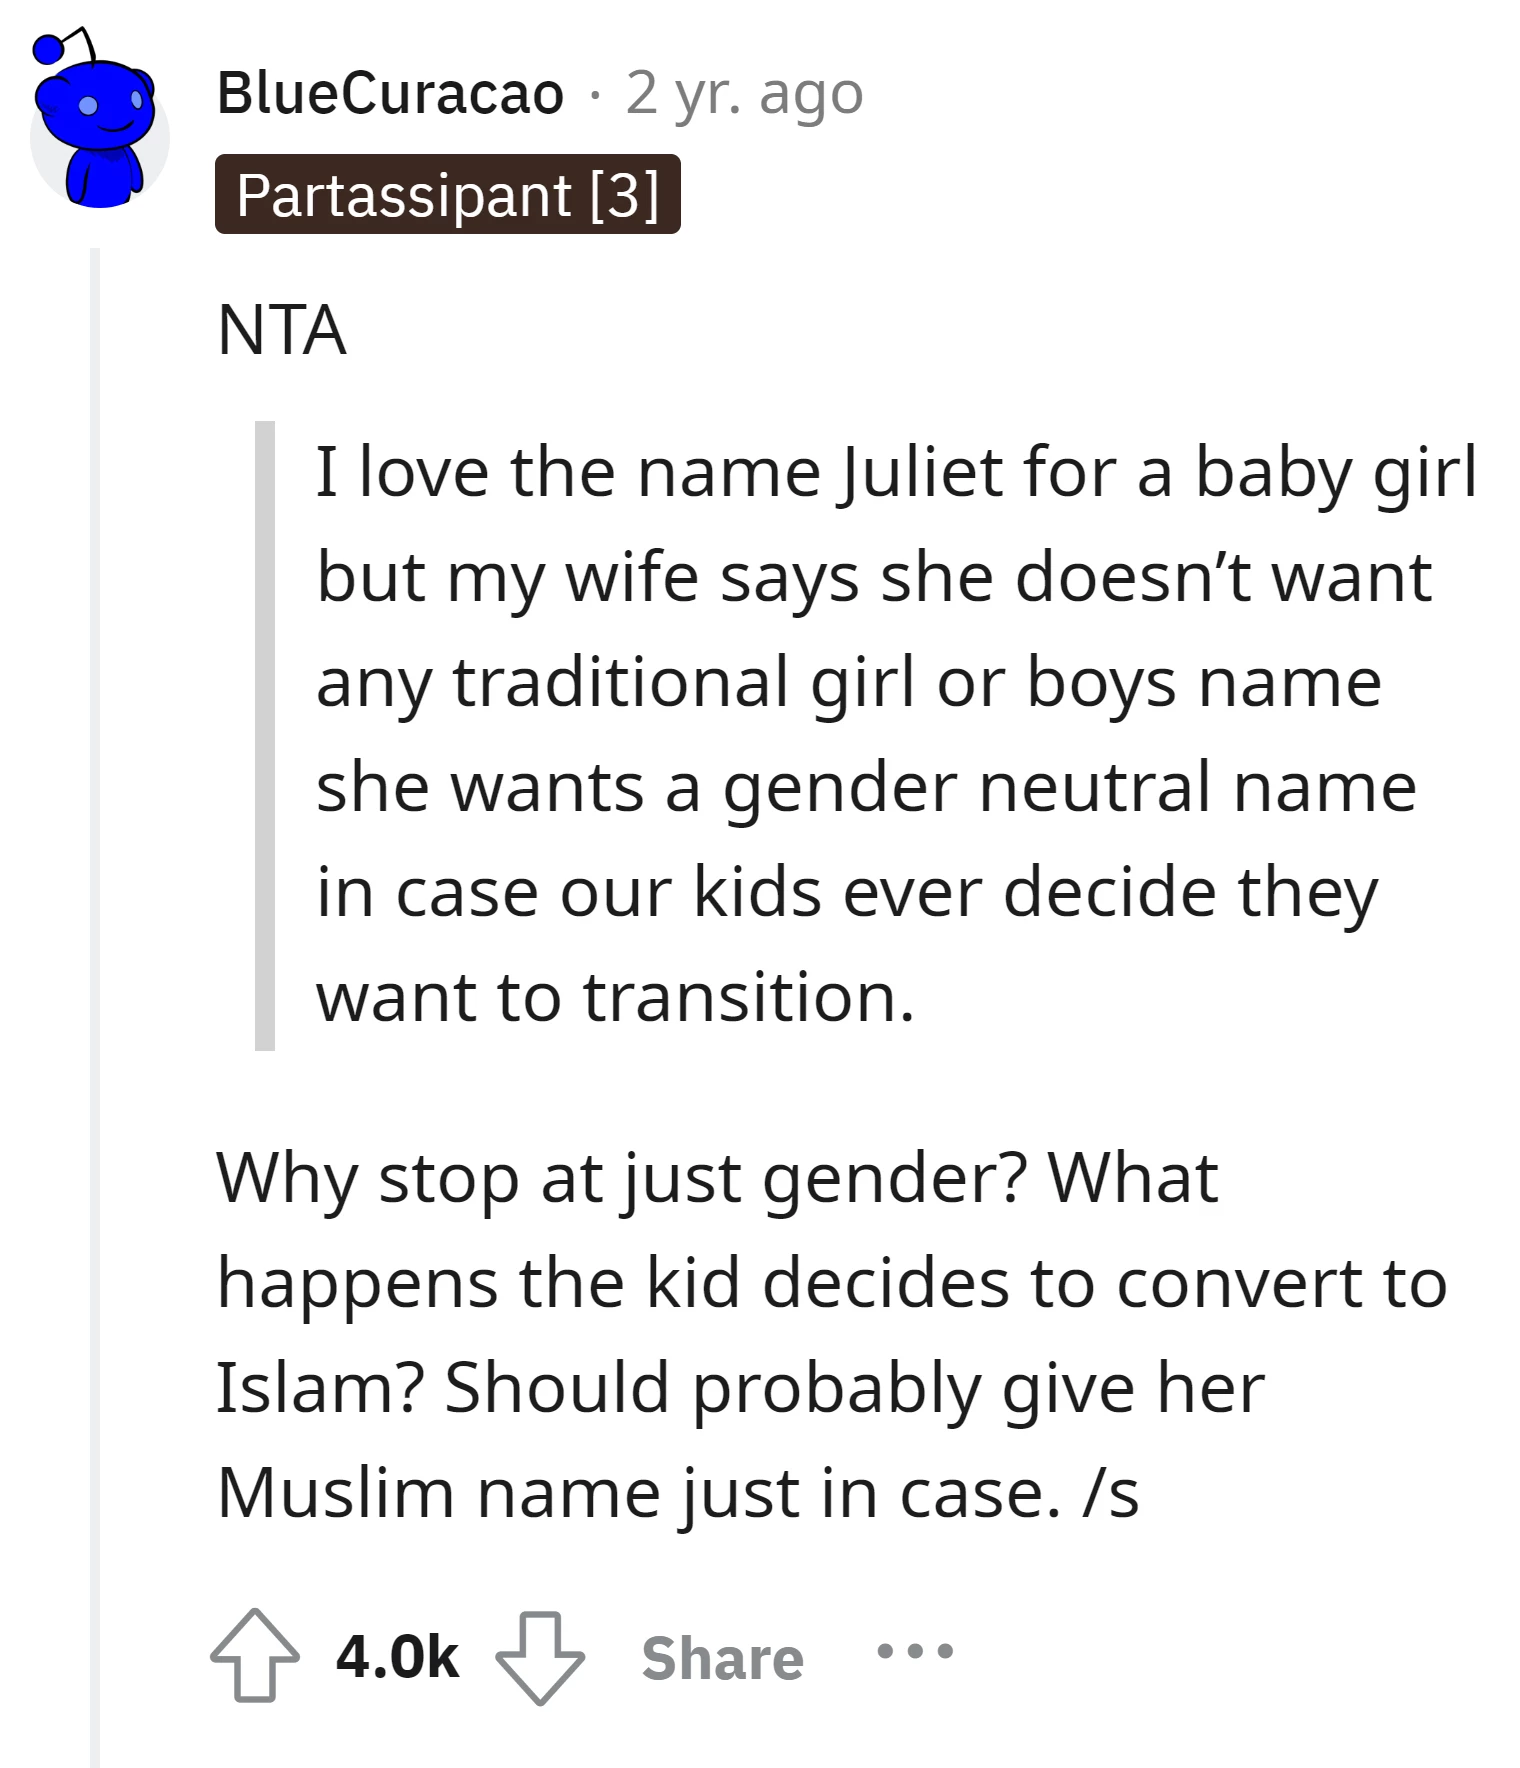 Commenter criticizes the idea of choosing a gender-neutral name based on potential future decisions